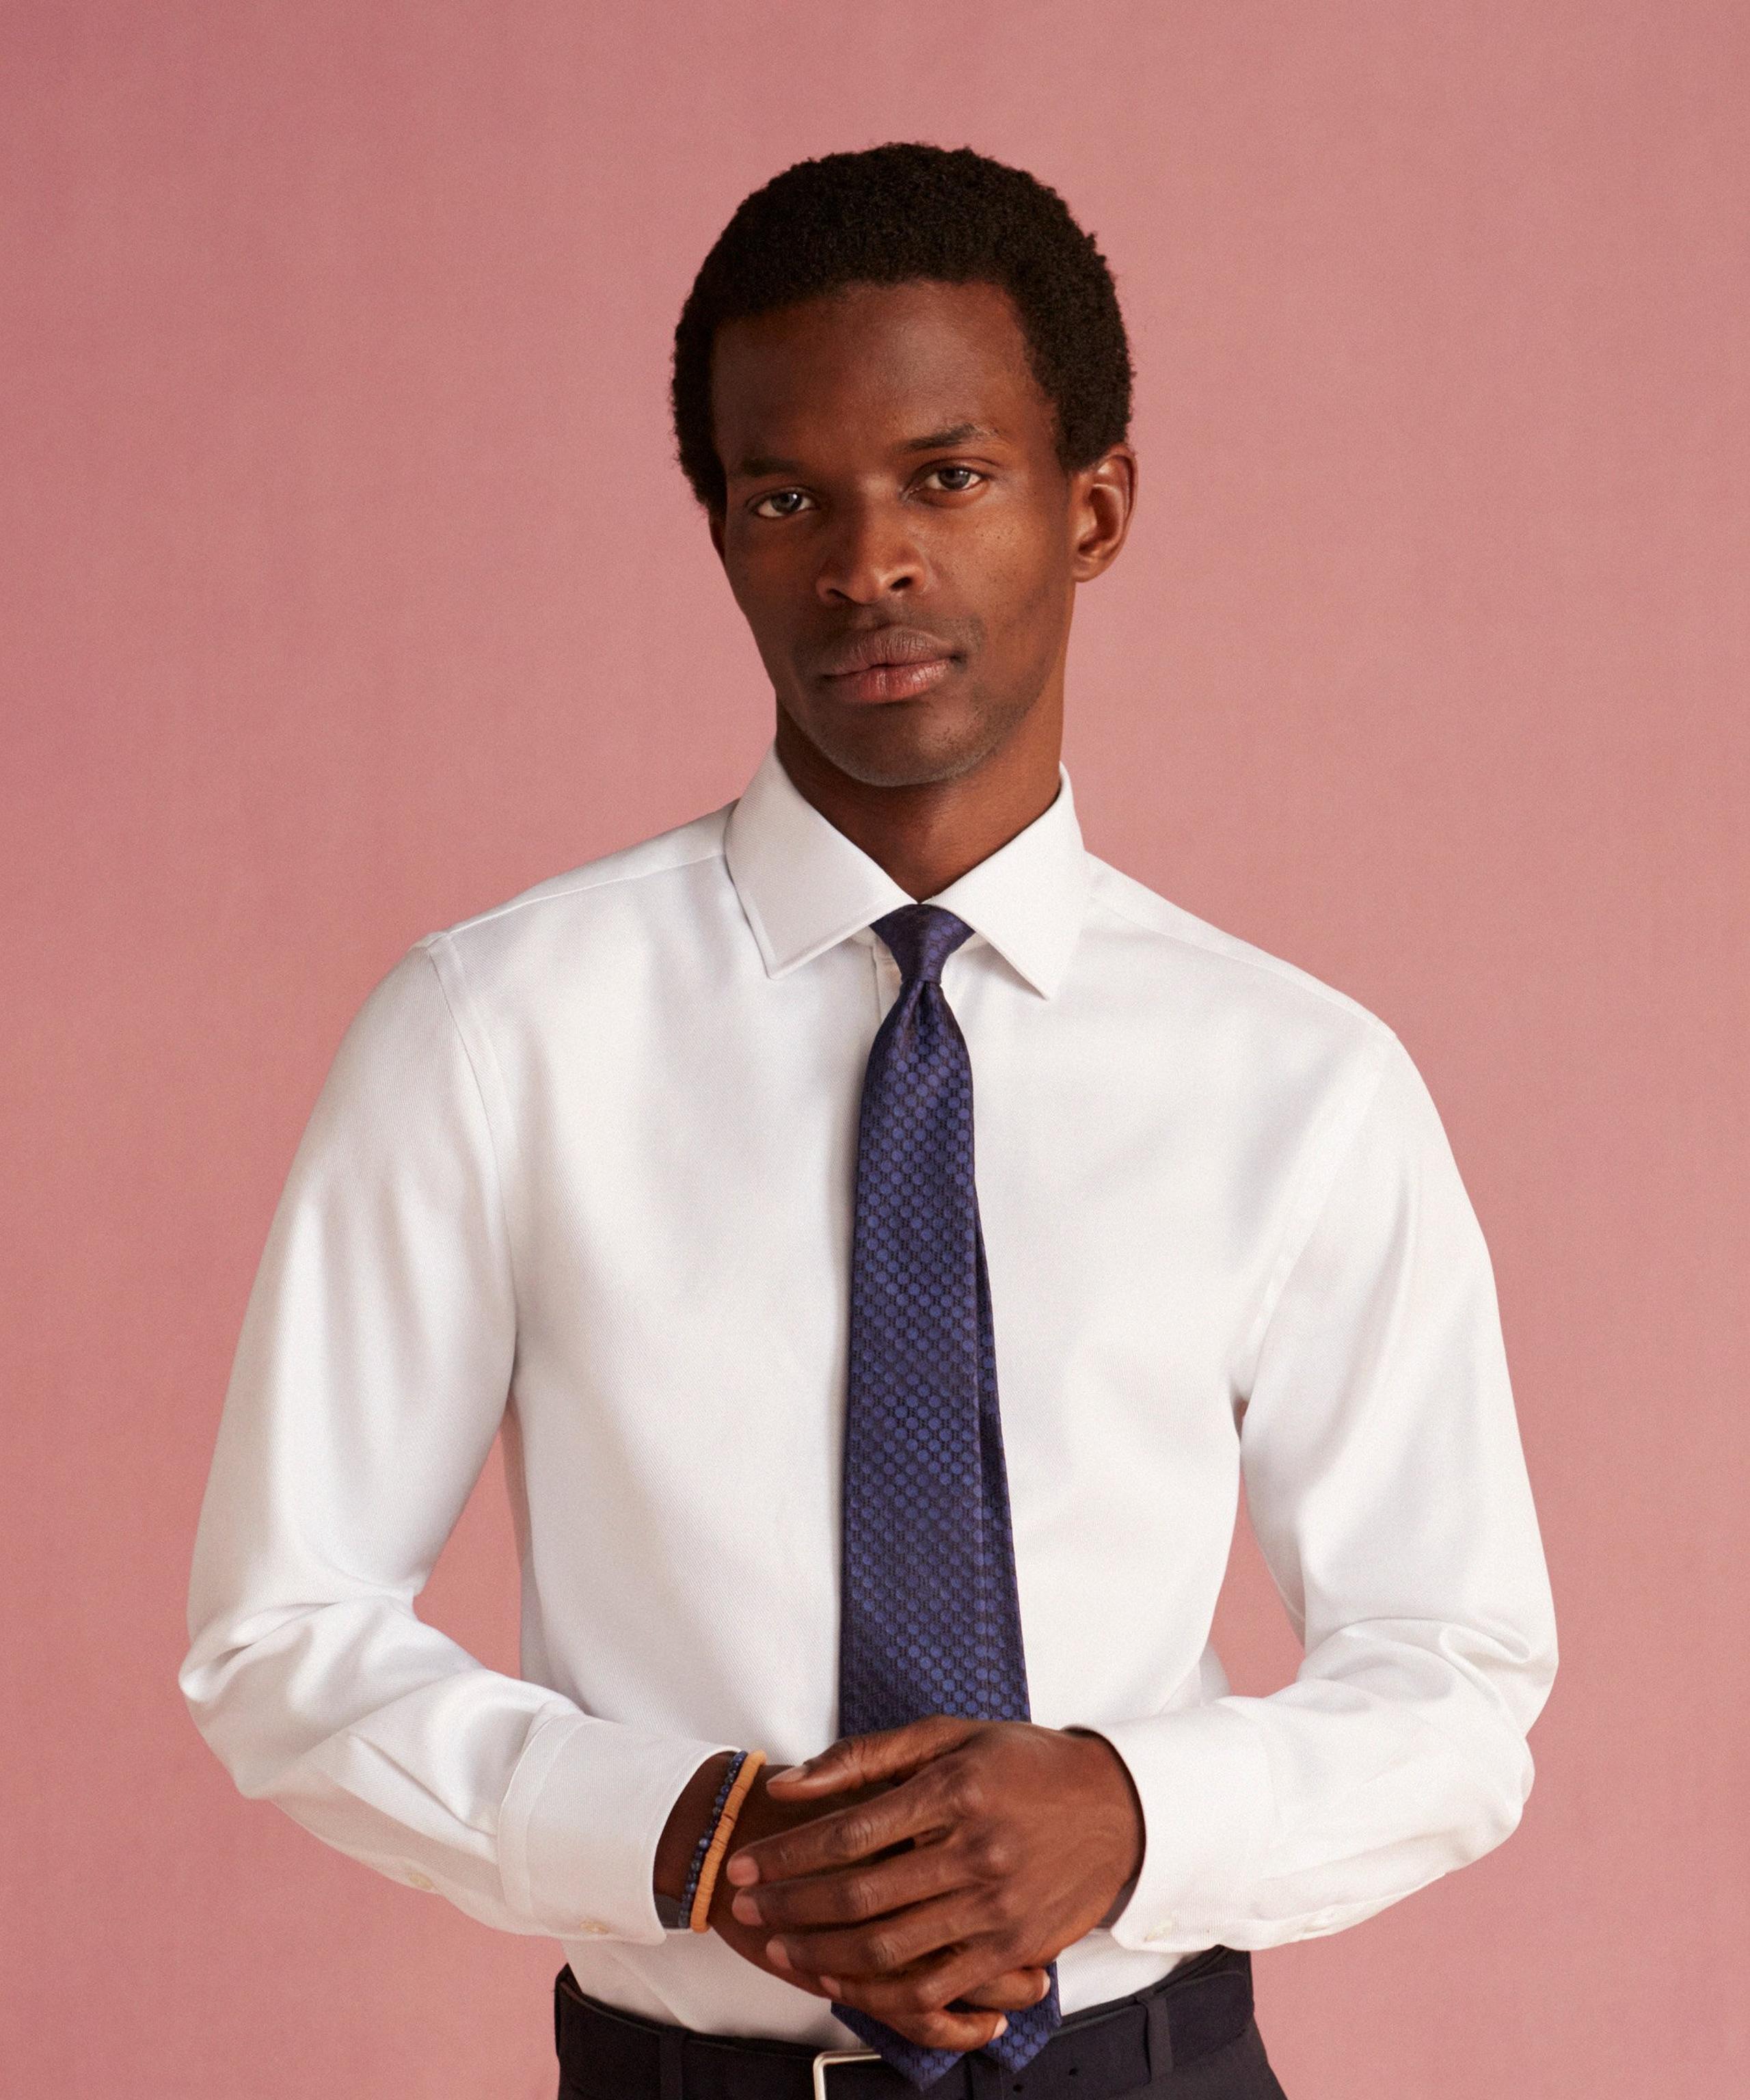 A man wears a white shirt with navy tie